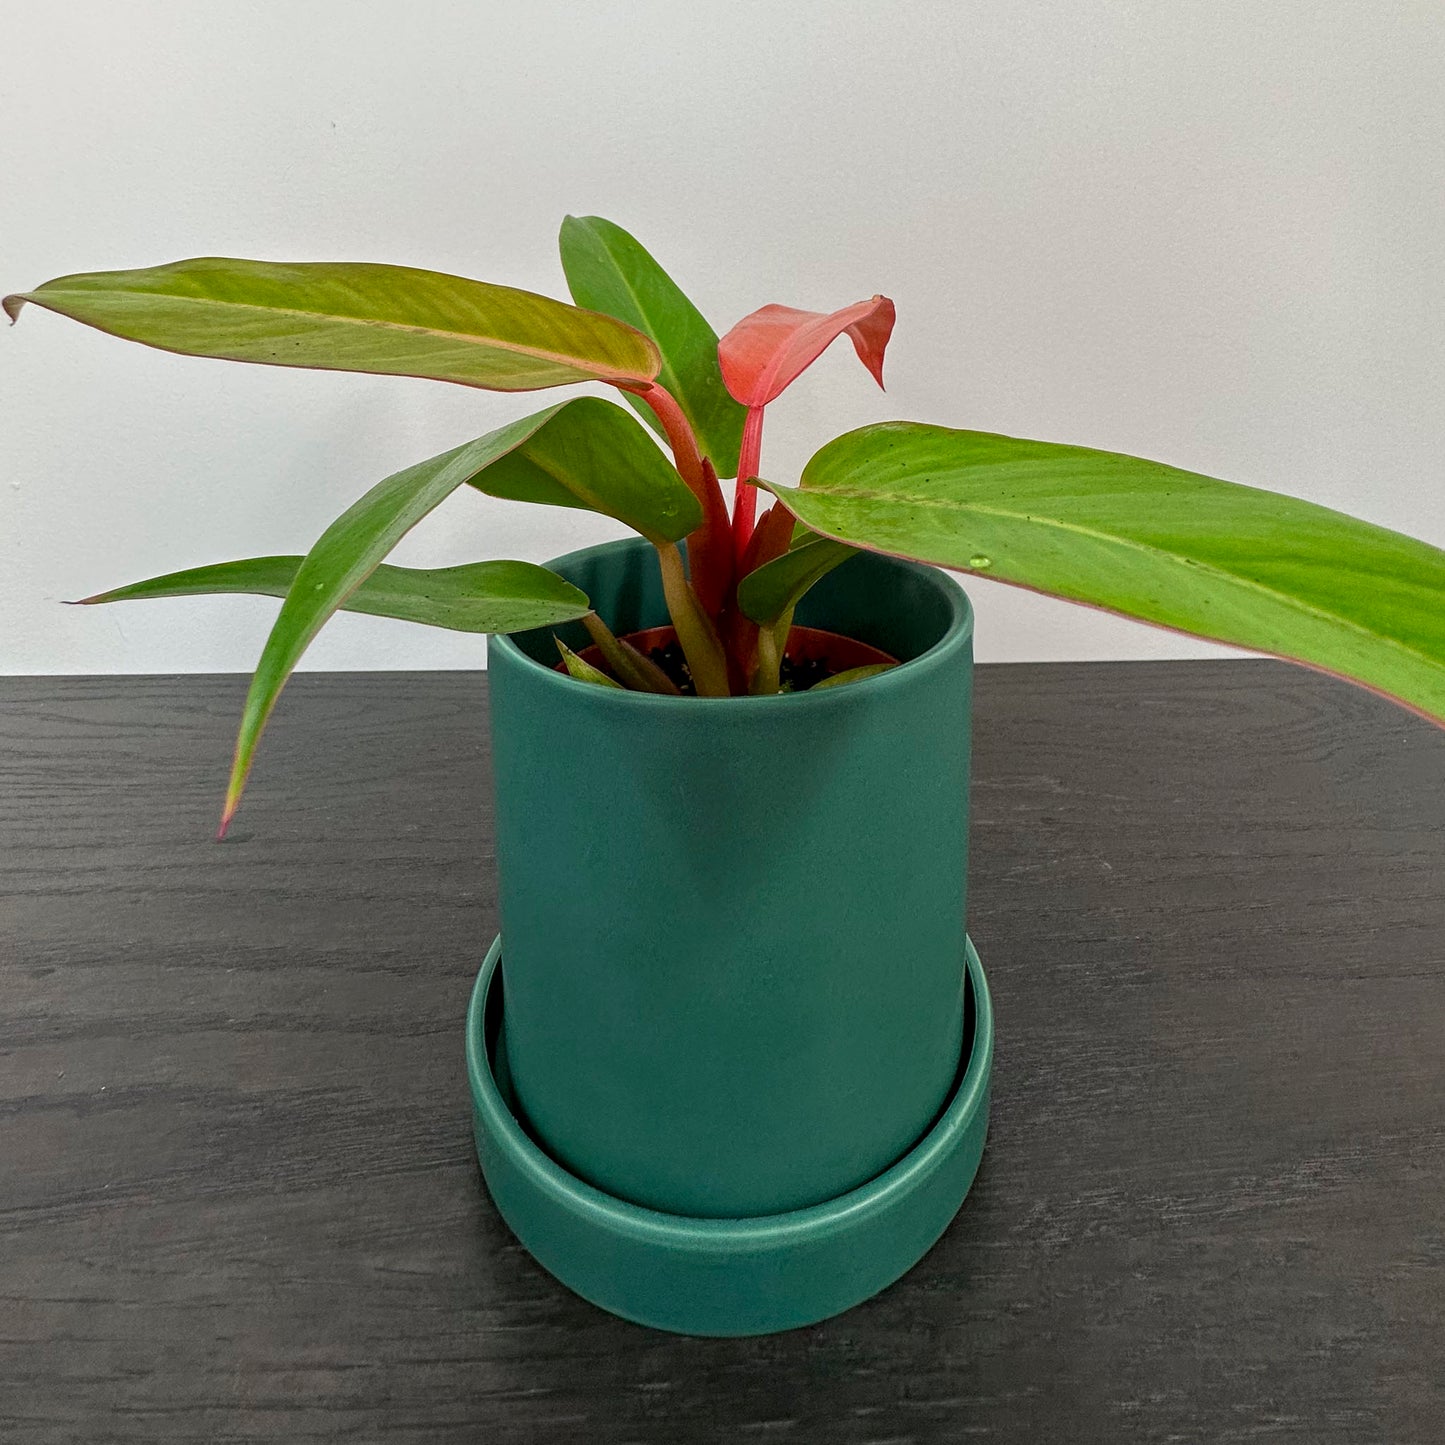 Green ceramic planter holding a philodendron